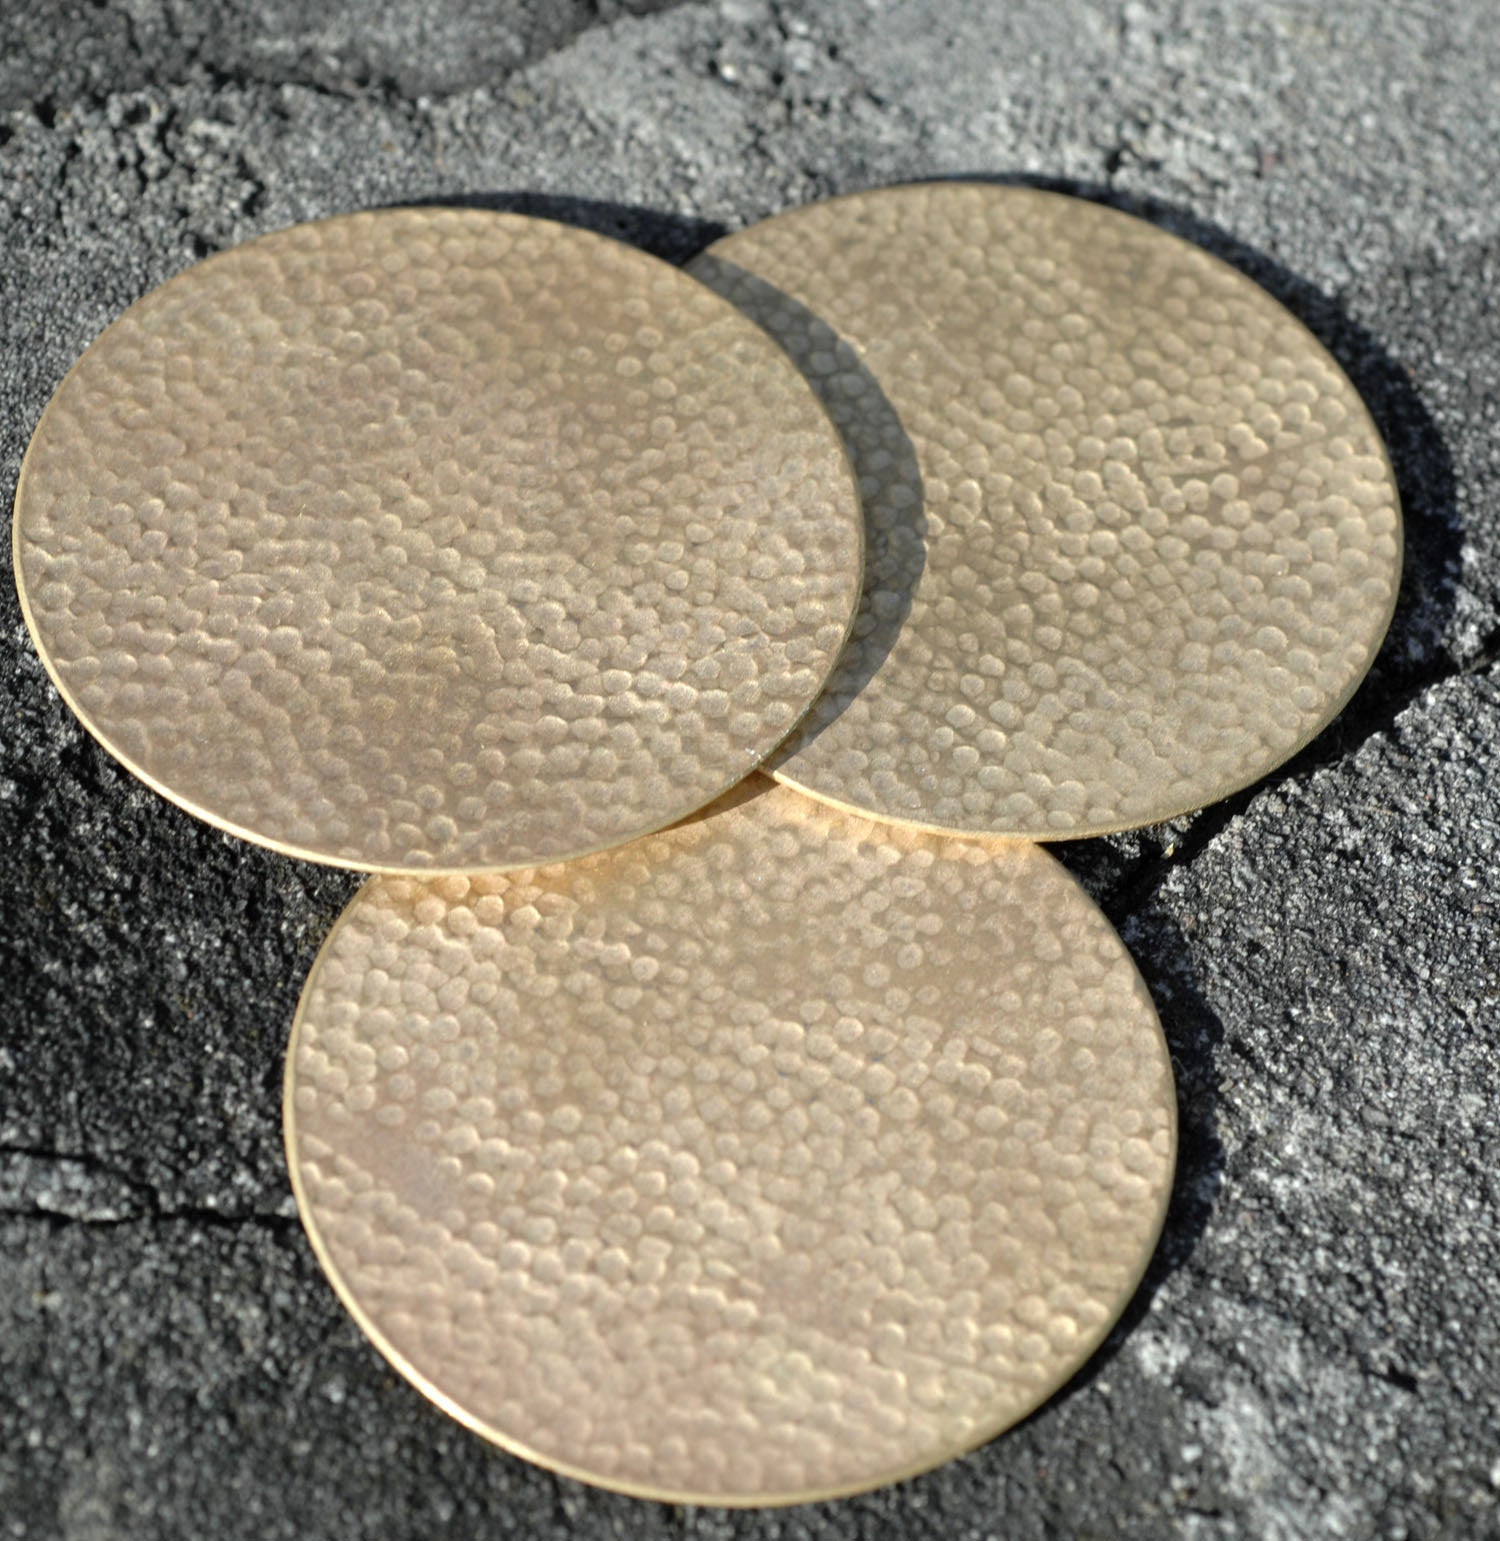 Dappled Hammered Pattern Large Disc Tag 65mm Blanks Cutout for Metalworking Stamping Texturing Blank Variety of Metals